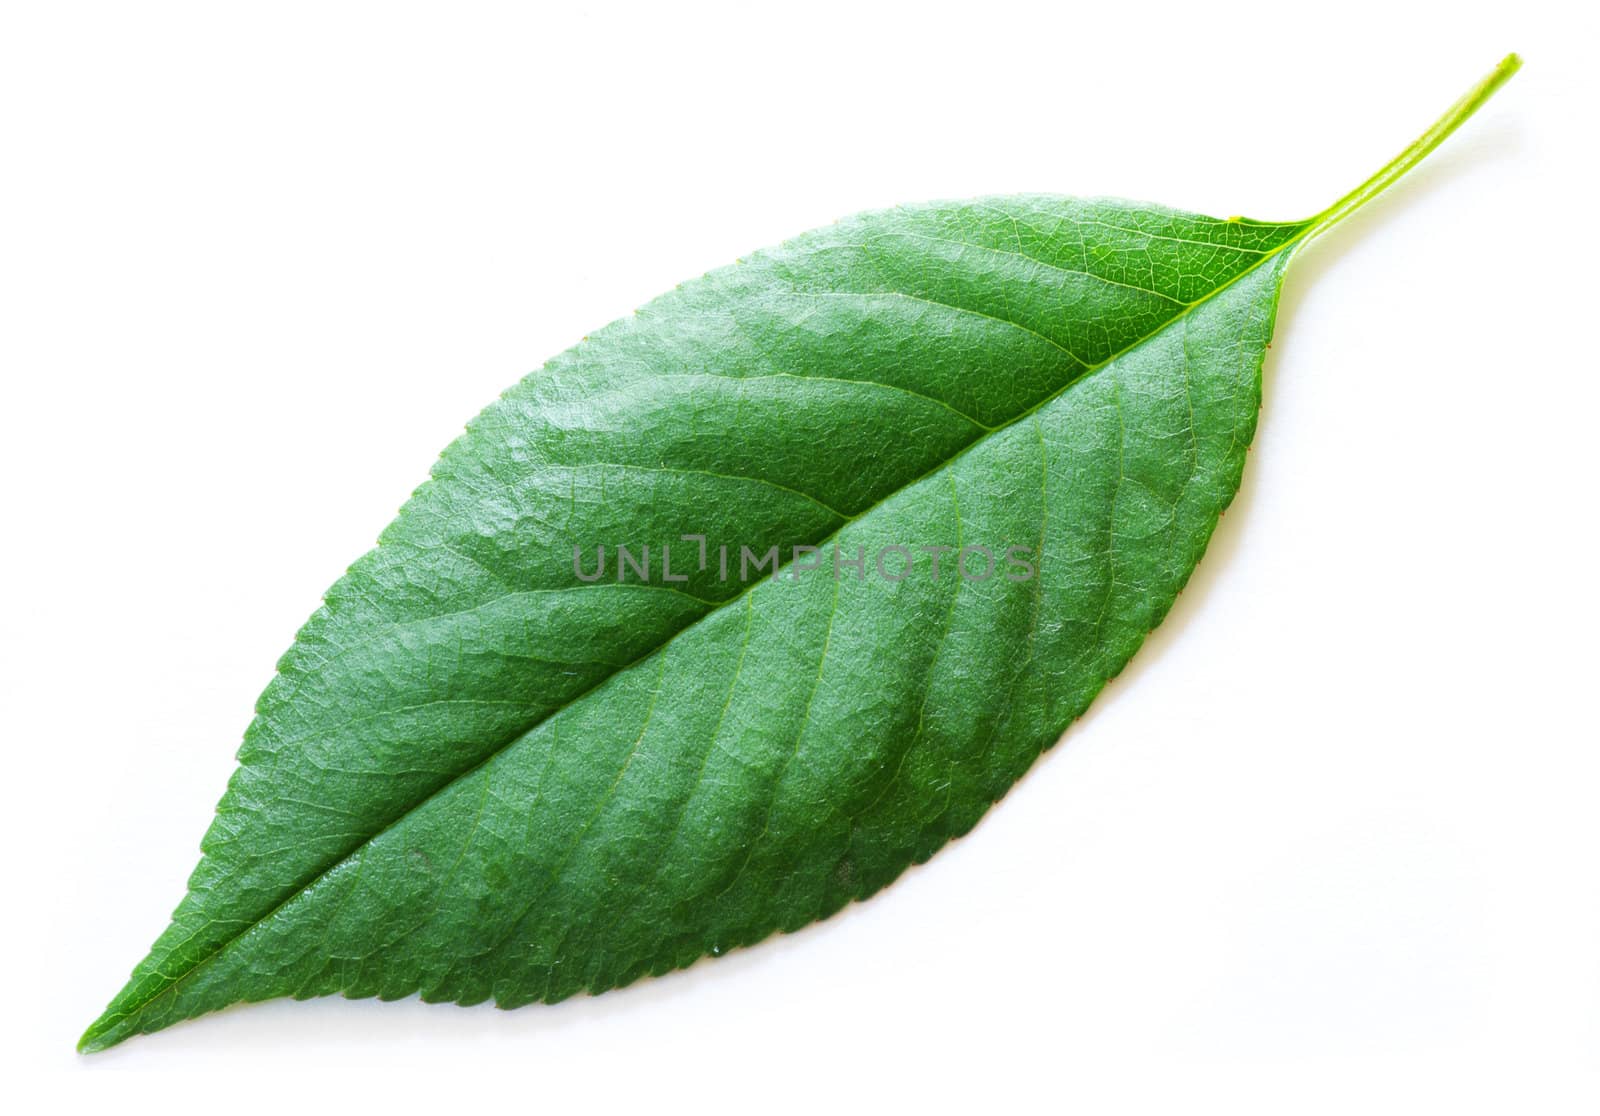 green leaf isolated on a white